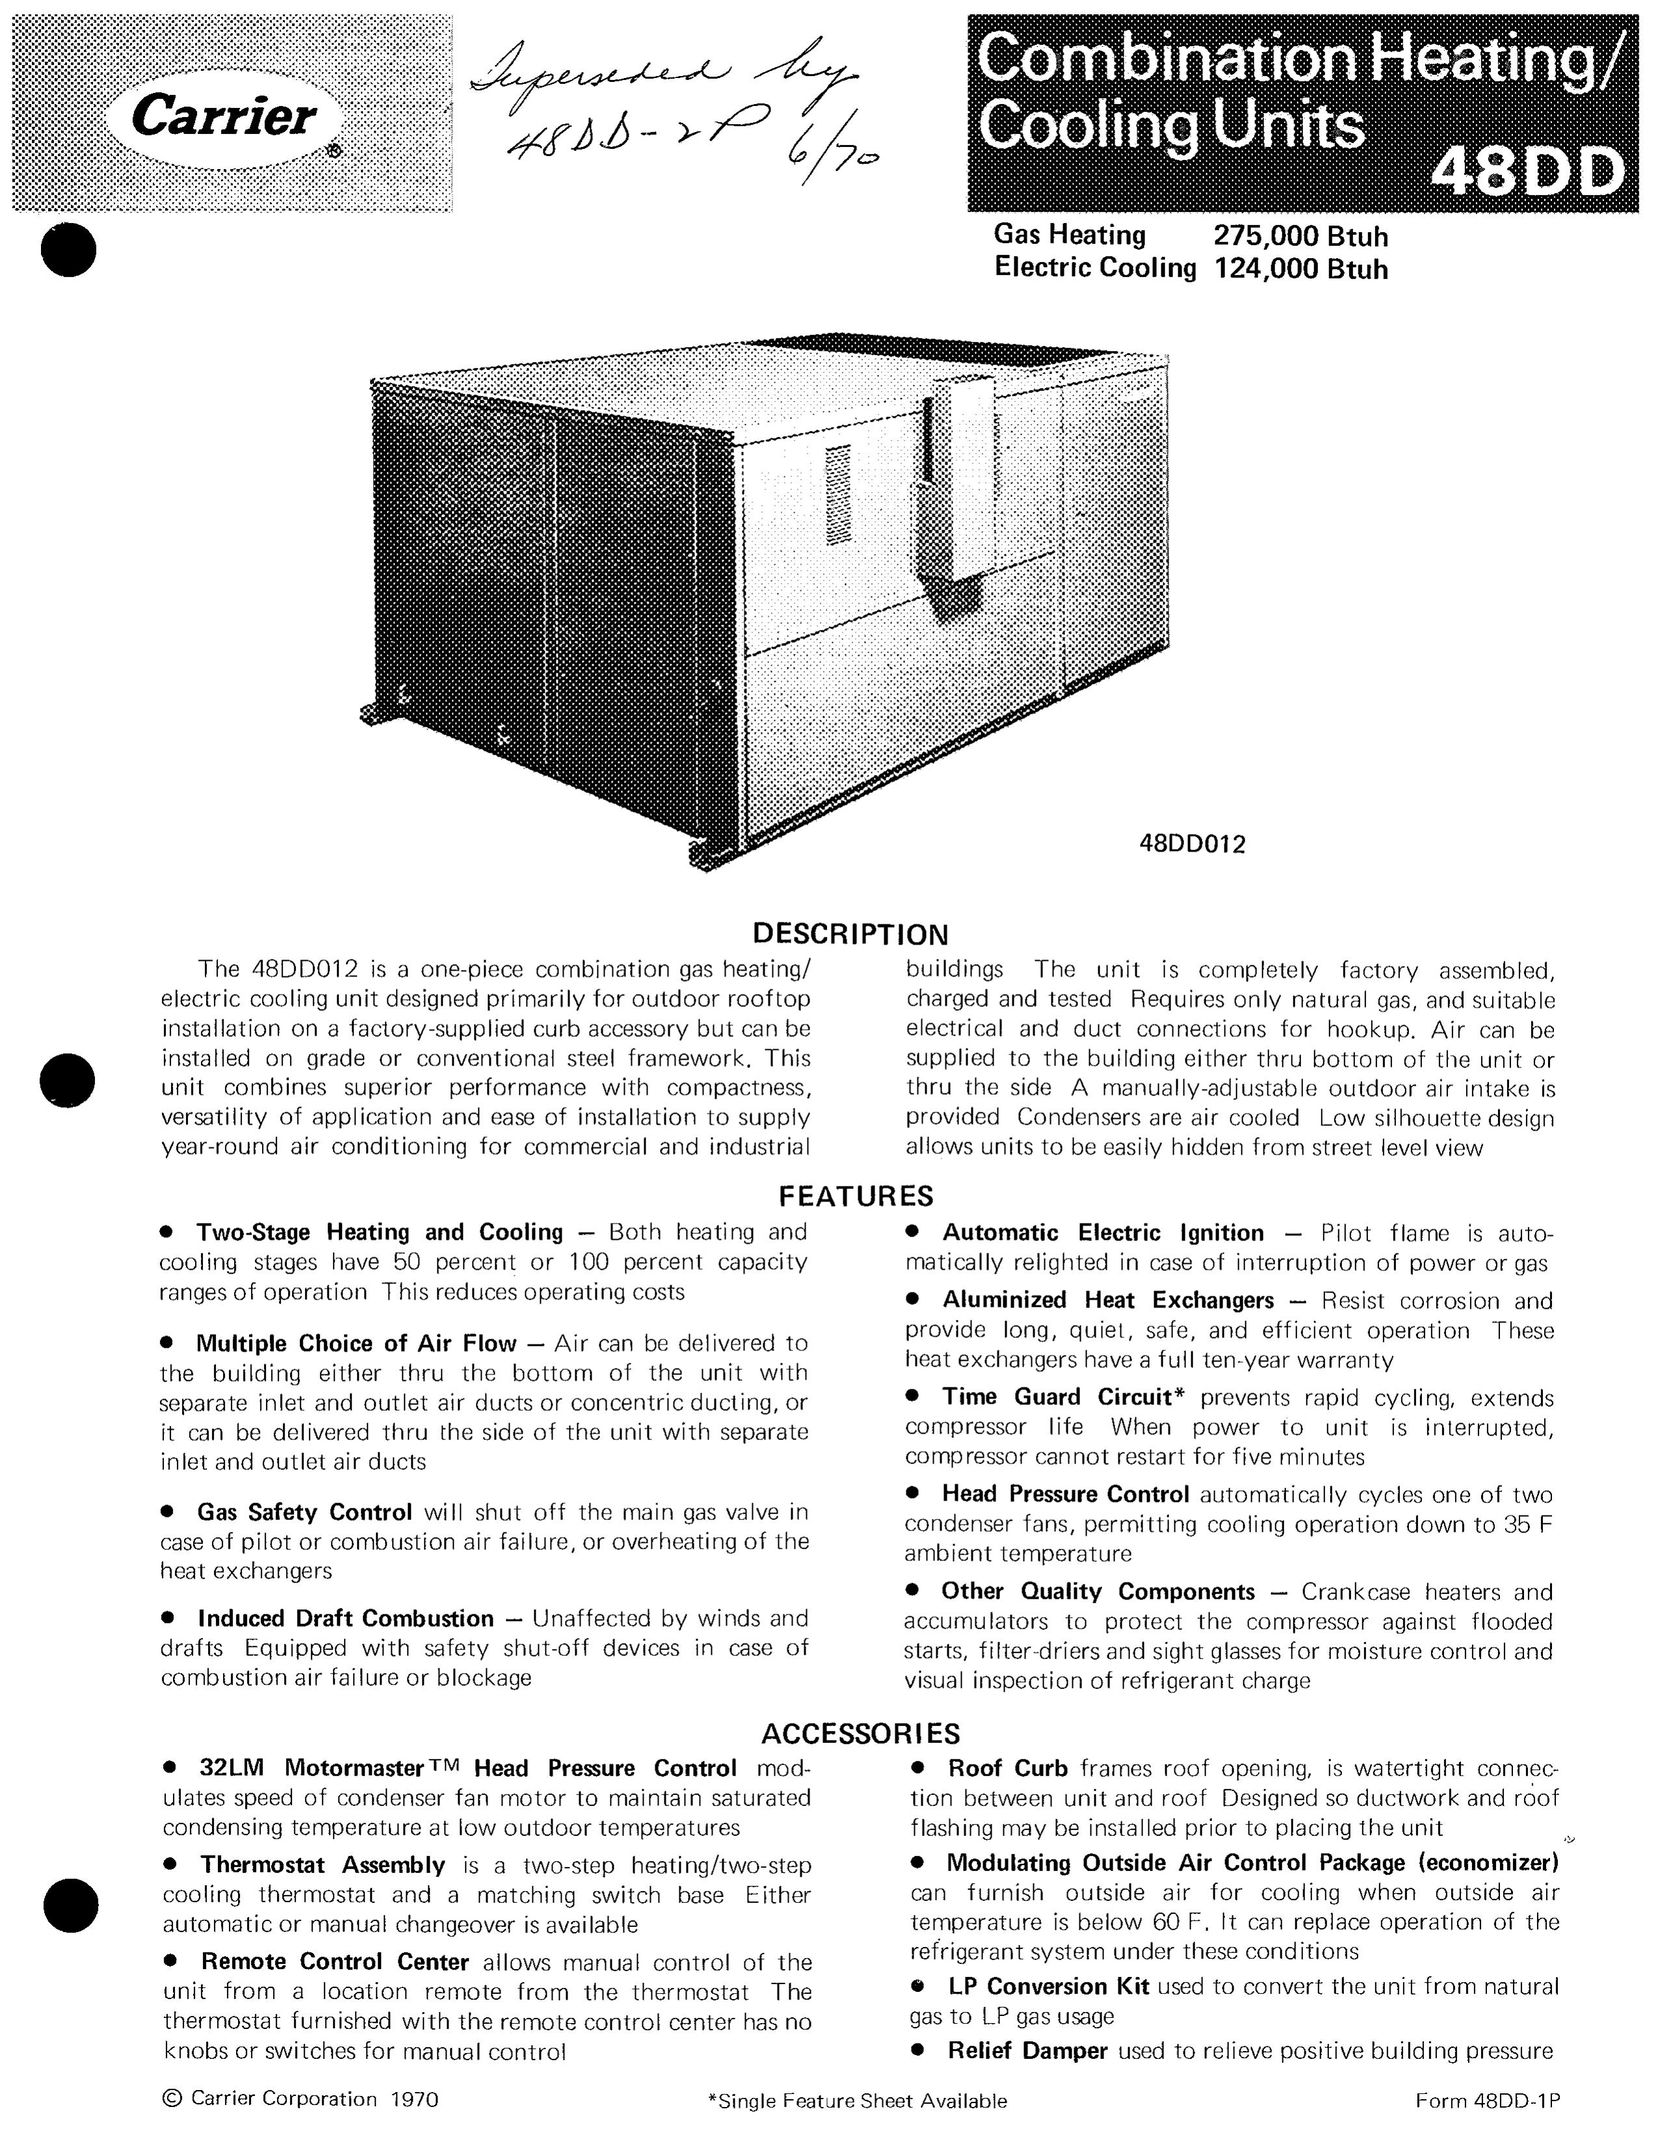 Carrier 48DD Heating System User Manual